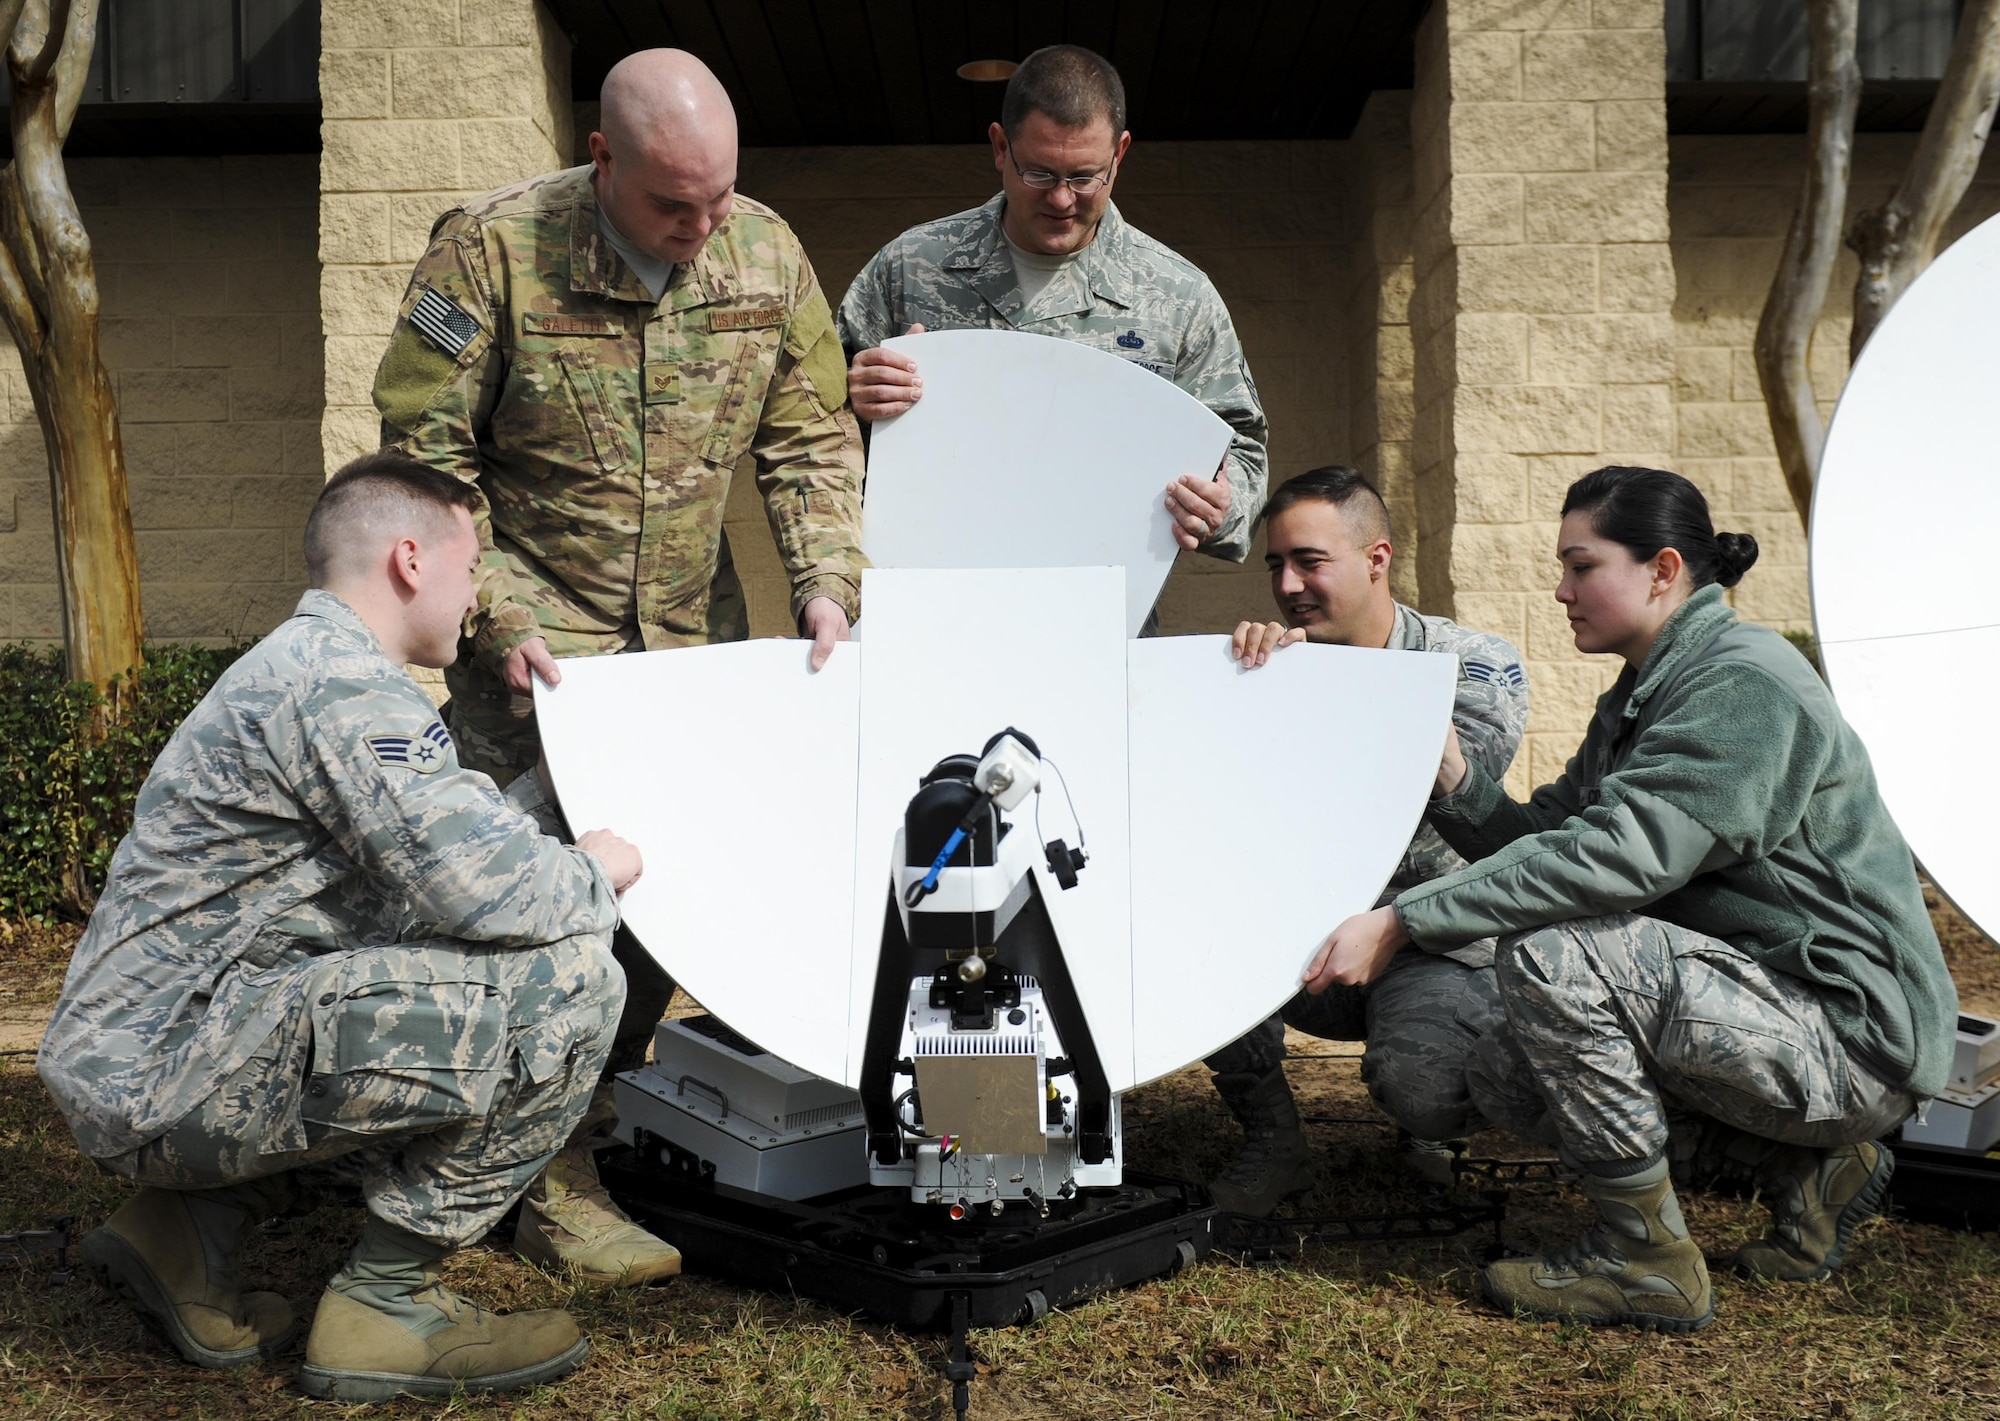 Members of the 25th Intelligence Squadron assemble a Hawkeye lite satellite dish at Hurlburt Field, Fla., Jan. 11, 2017. The satellite dishes are part of the special operations deployable node Silent Dagger. Silent Dagger provides classified network reach-back for intelligence support to Air Force Special Operations Command’s SILENT SHIELD mission. (U.S. Air Force photo by Airman Dennis Spain)